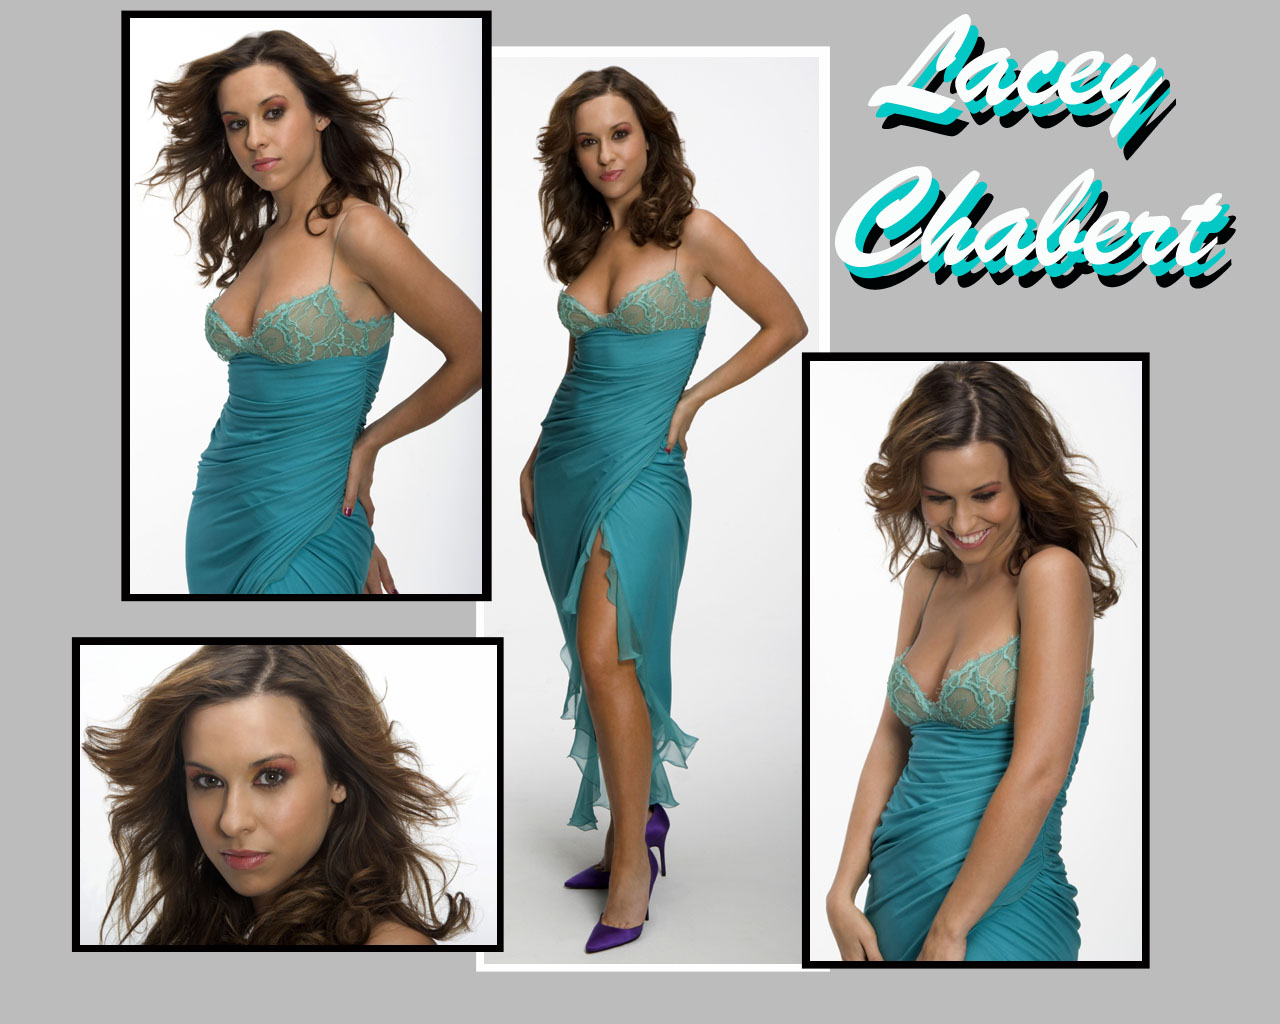 Download HQ Lacey Chabert wallpaper / Celebrities Female / 1280x1024